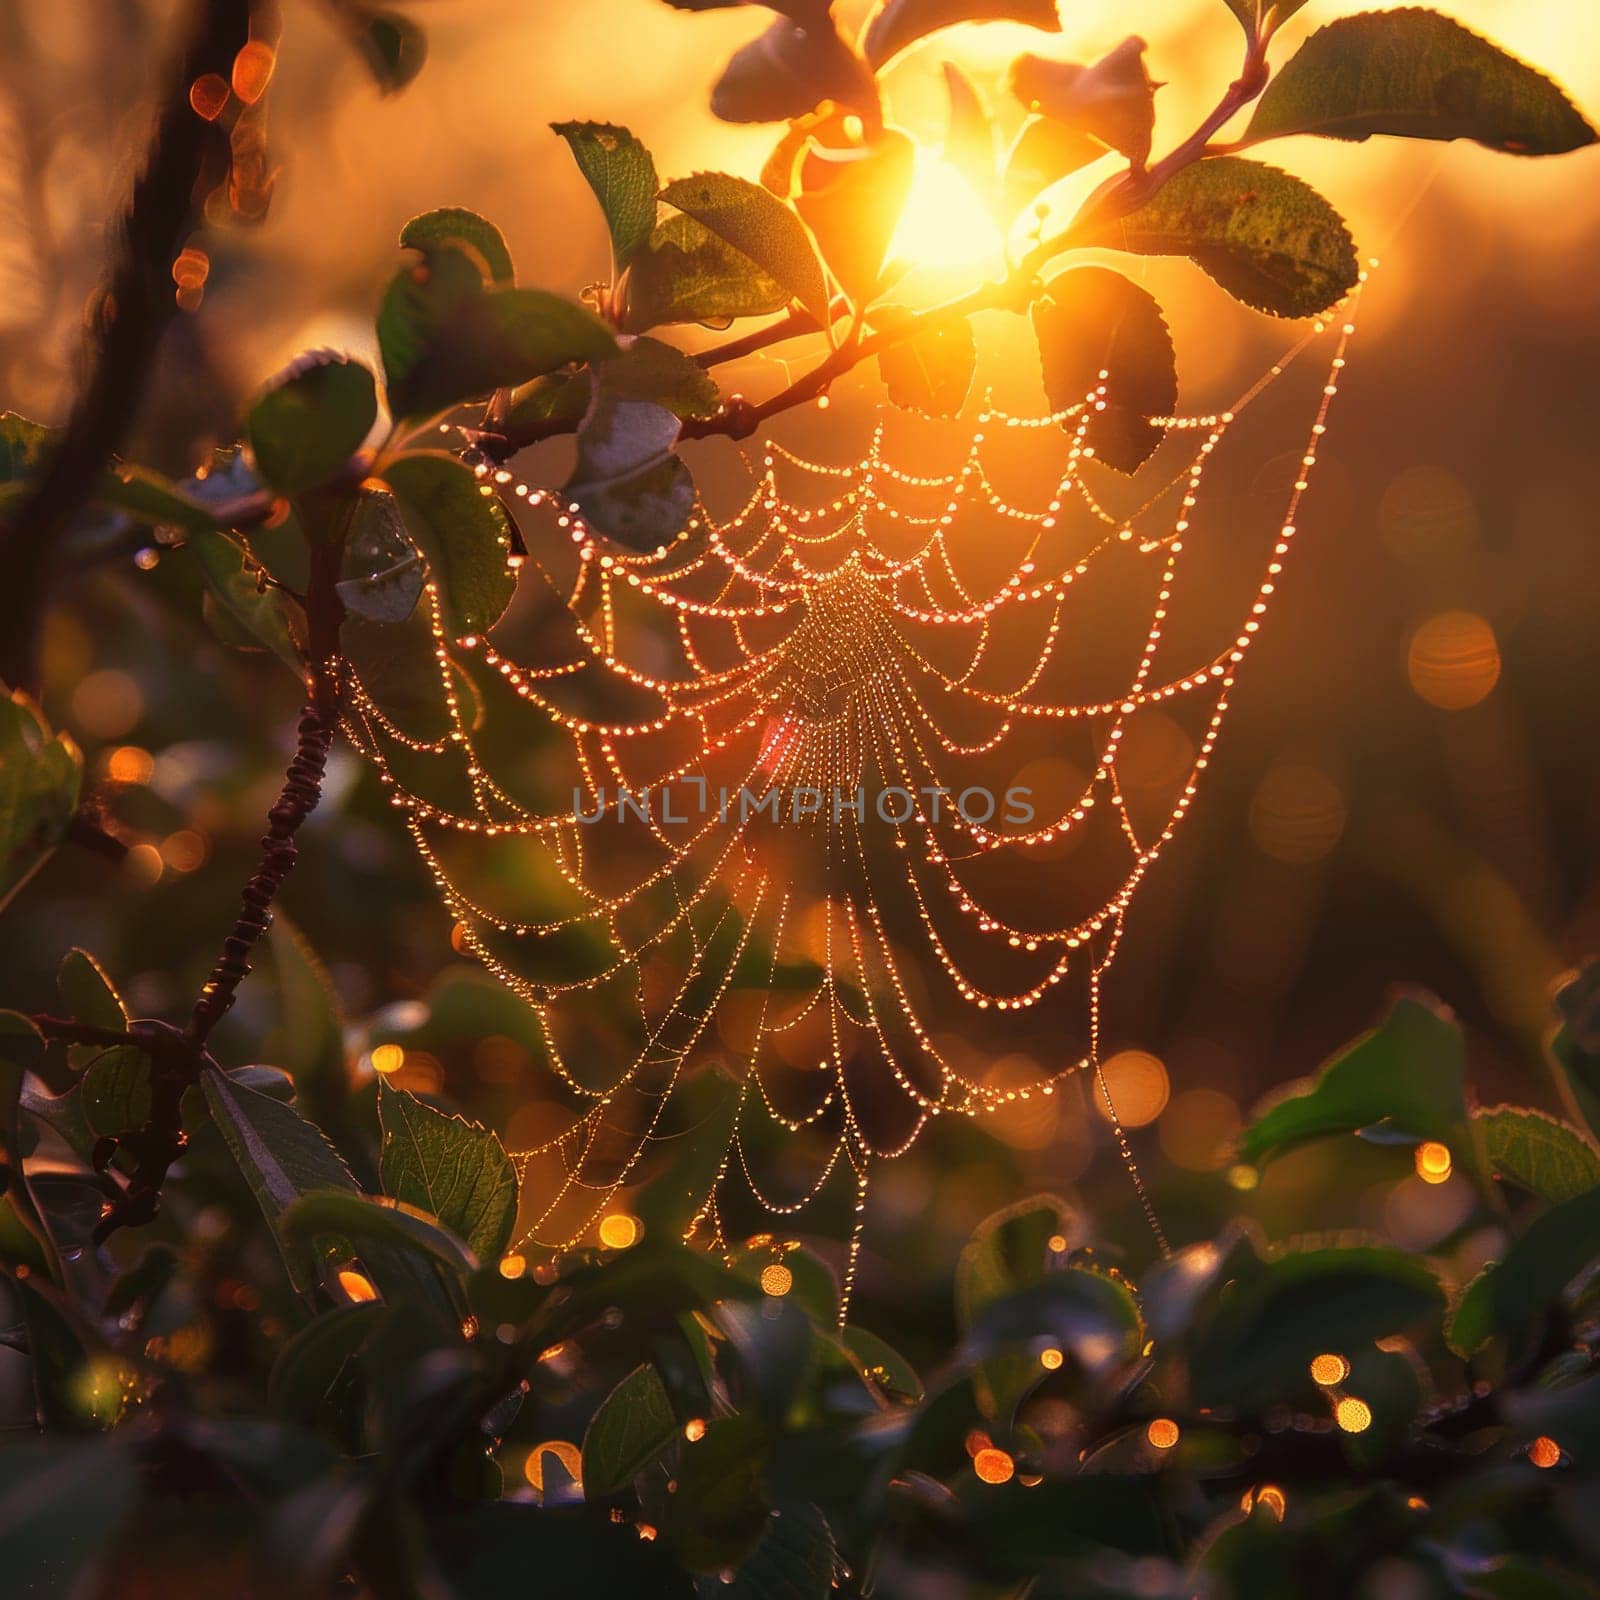 A spider web covered in morning dew shines in the sunlight, showcasing natures intricate design.